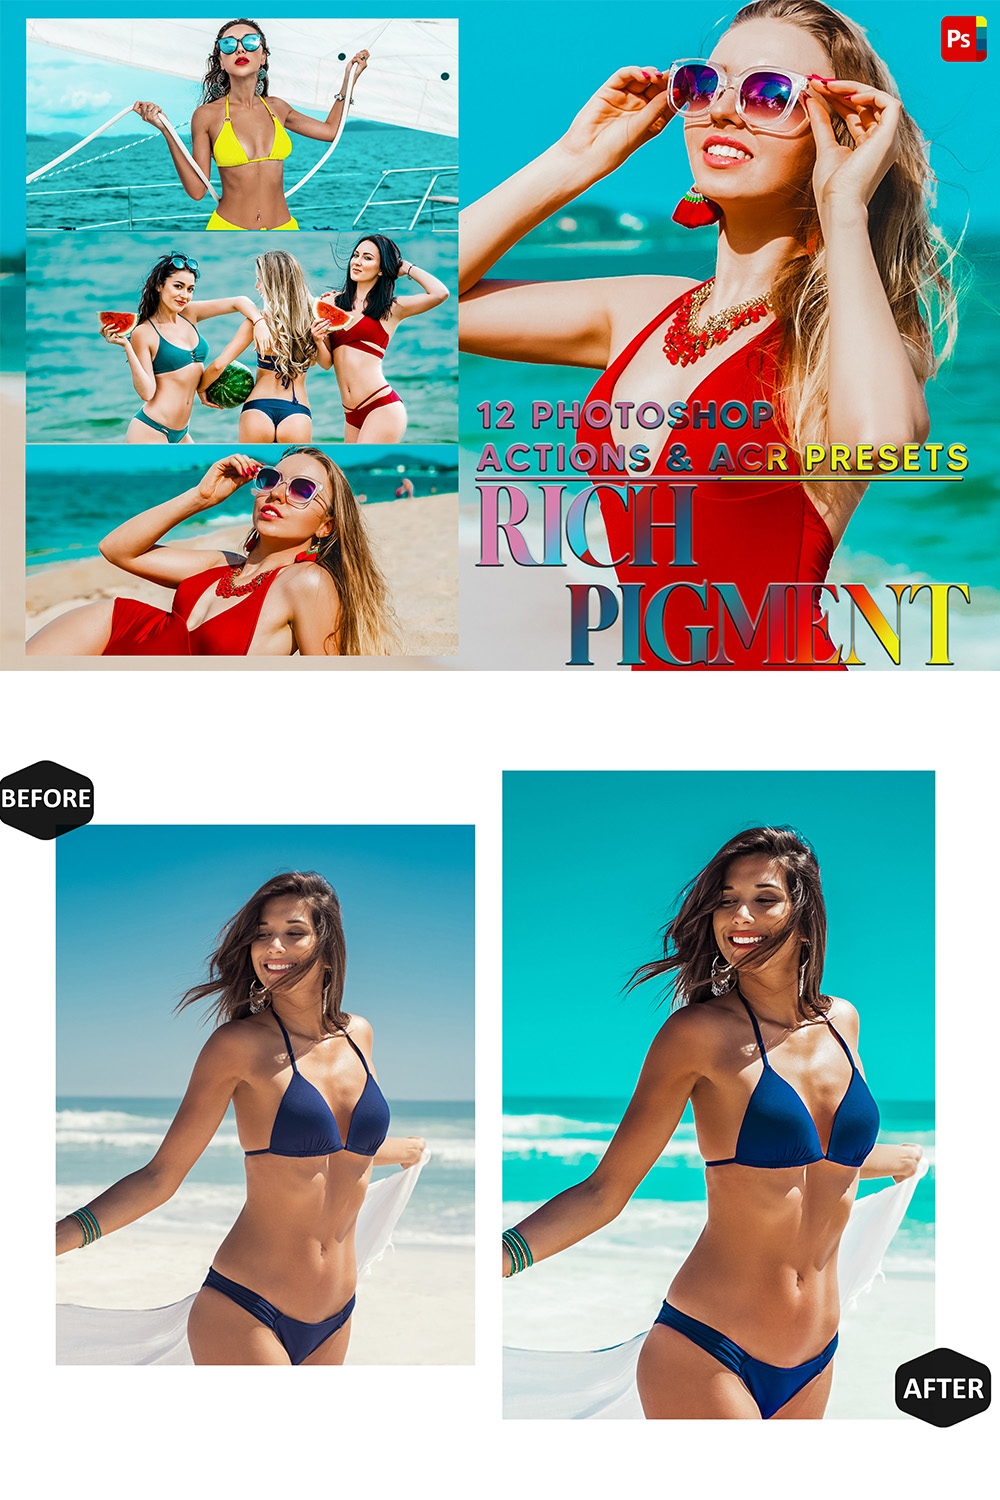 12 Photoshop Actions, Rich Pigment Ps Action, Vibrant ACR Preset, Summer Bright Ps Filter, Atn Portrait And Lifestyle Theme For Instagram, Blogger pinterest preview image.